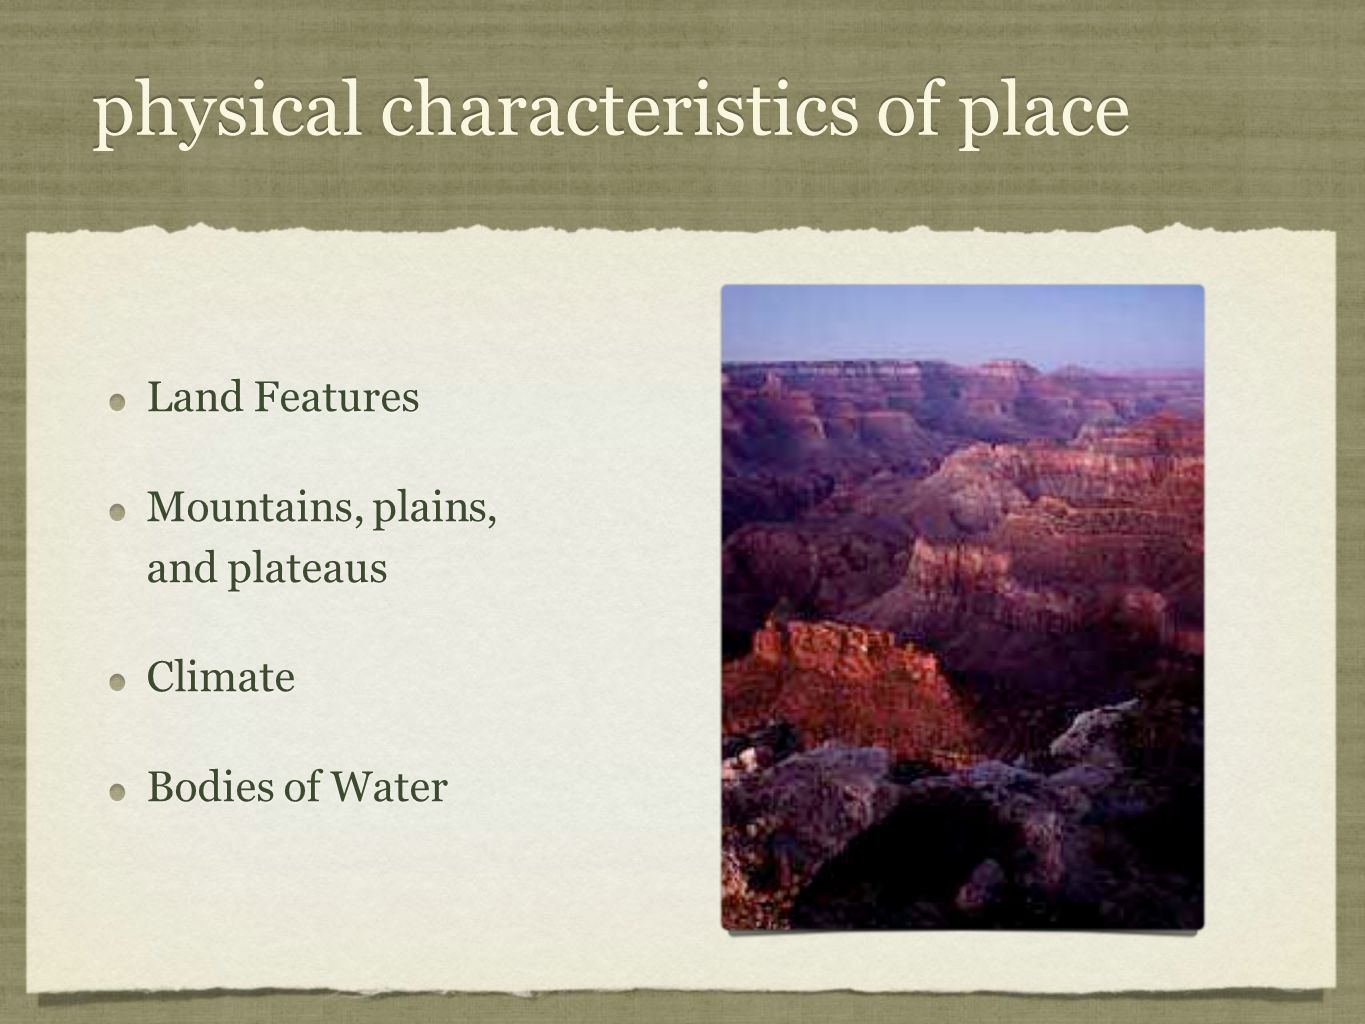 physical characteristics of place Land Features Mountains, plains, and plateaus Climate Bodies of Water Land Features Mountains, plains, and plateaus Climate Bodies of Water